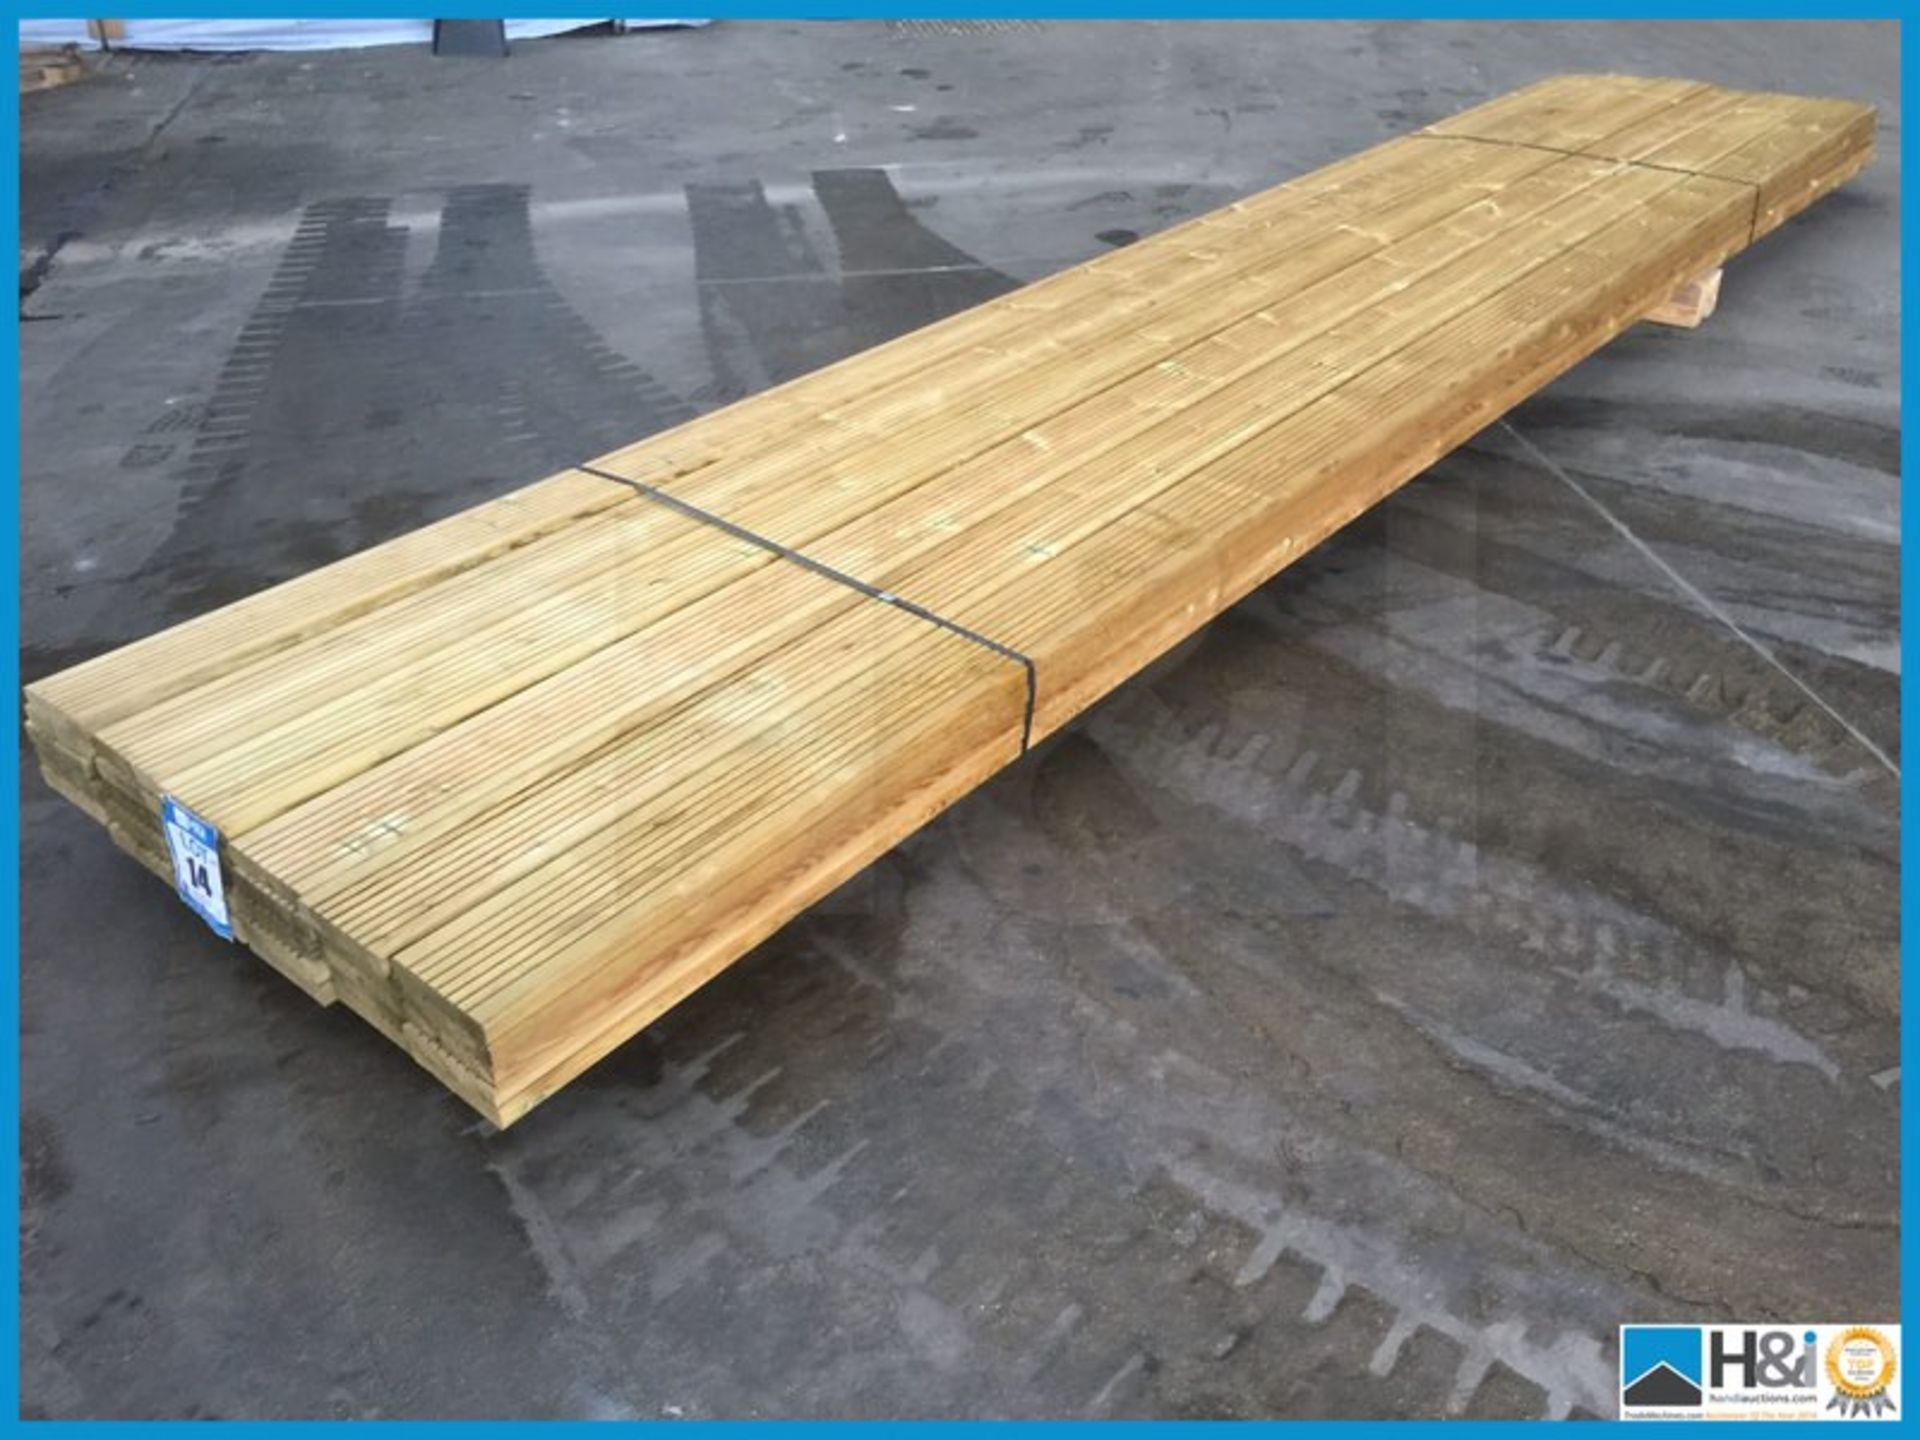 30 lengths of tanalised 32x150 decking at 4.5 metres long. Enough to cover 19m2 Appraisal: Viewing - Image 4 of 4